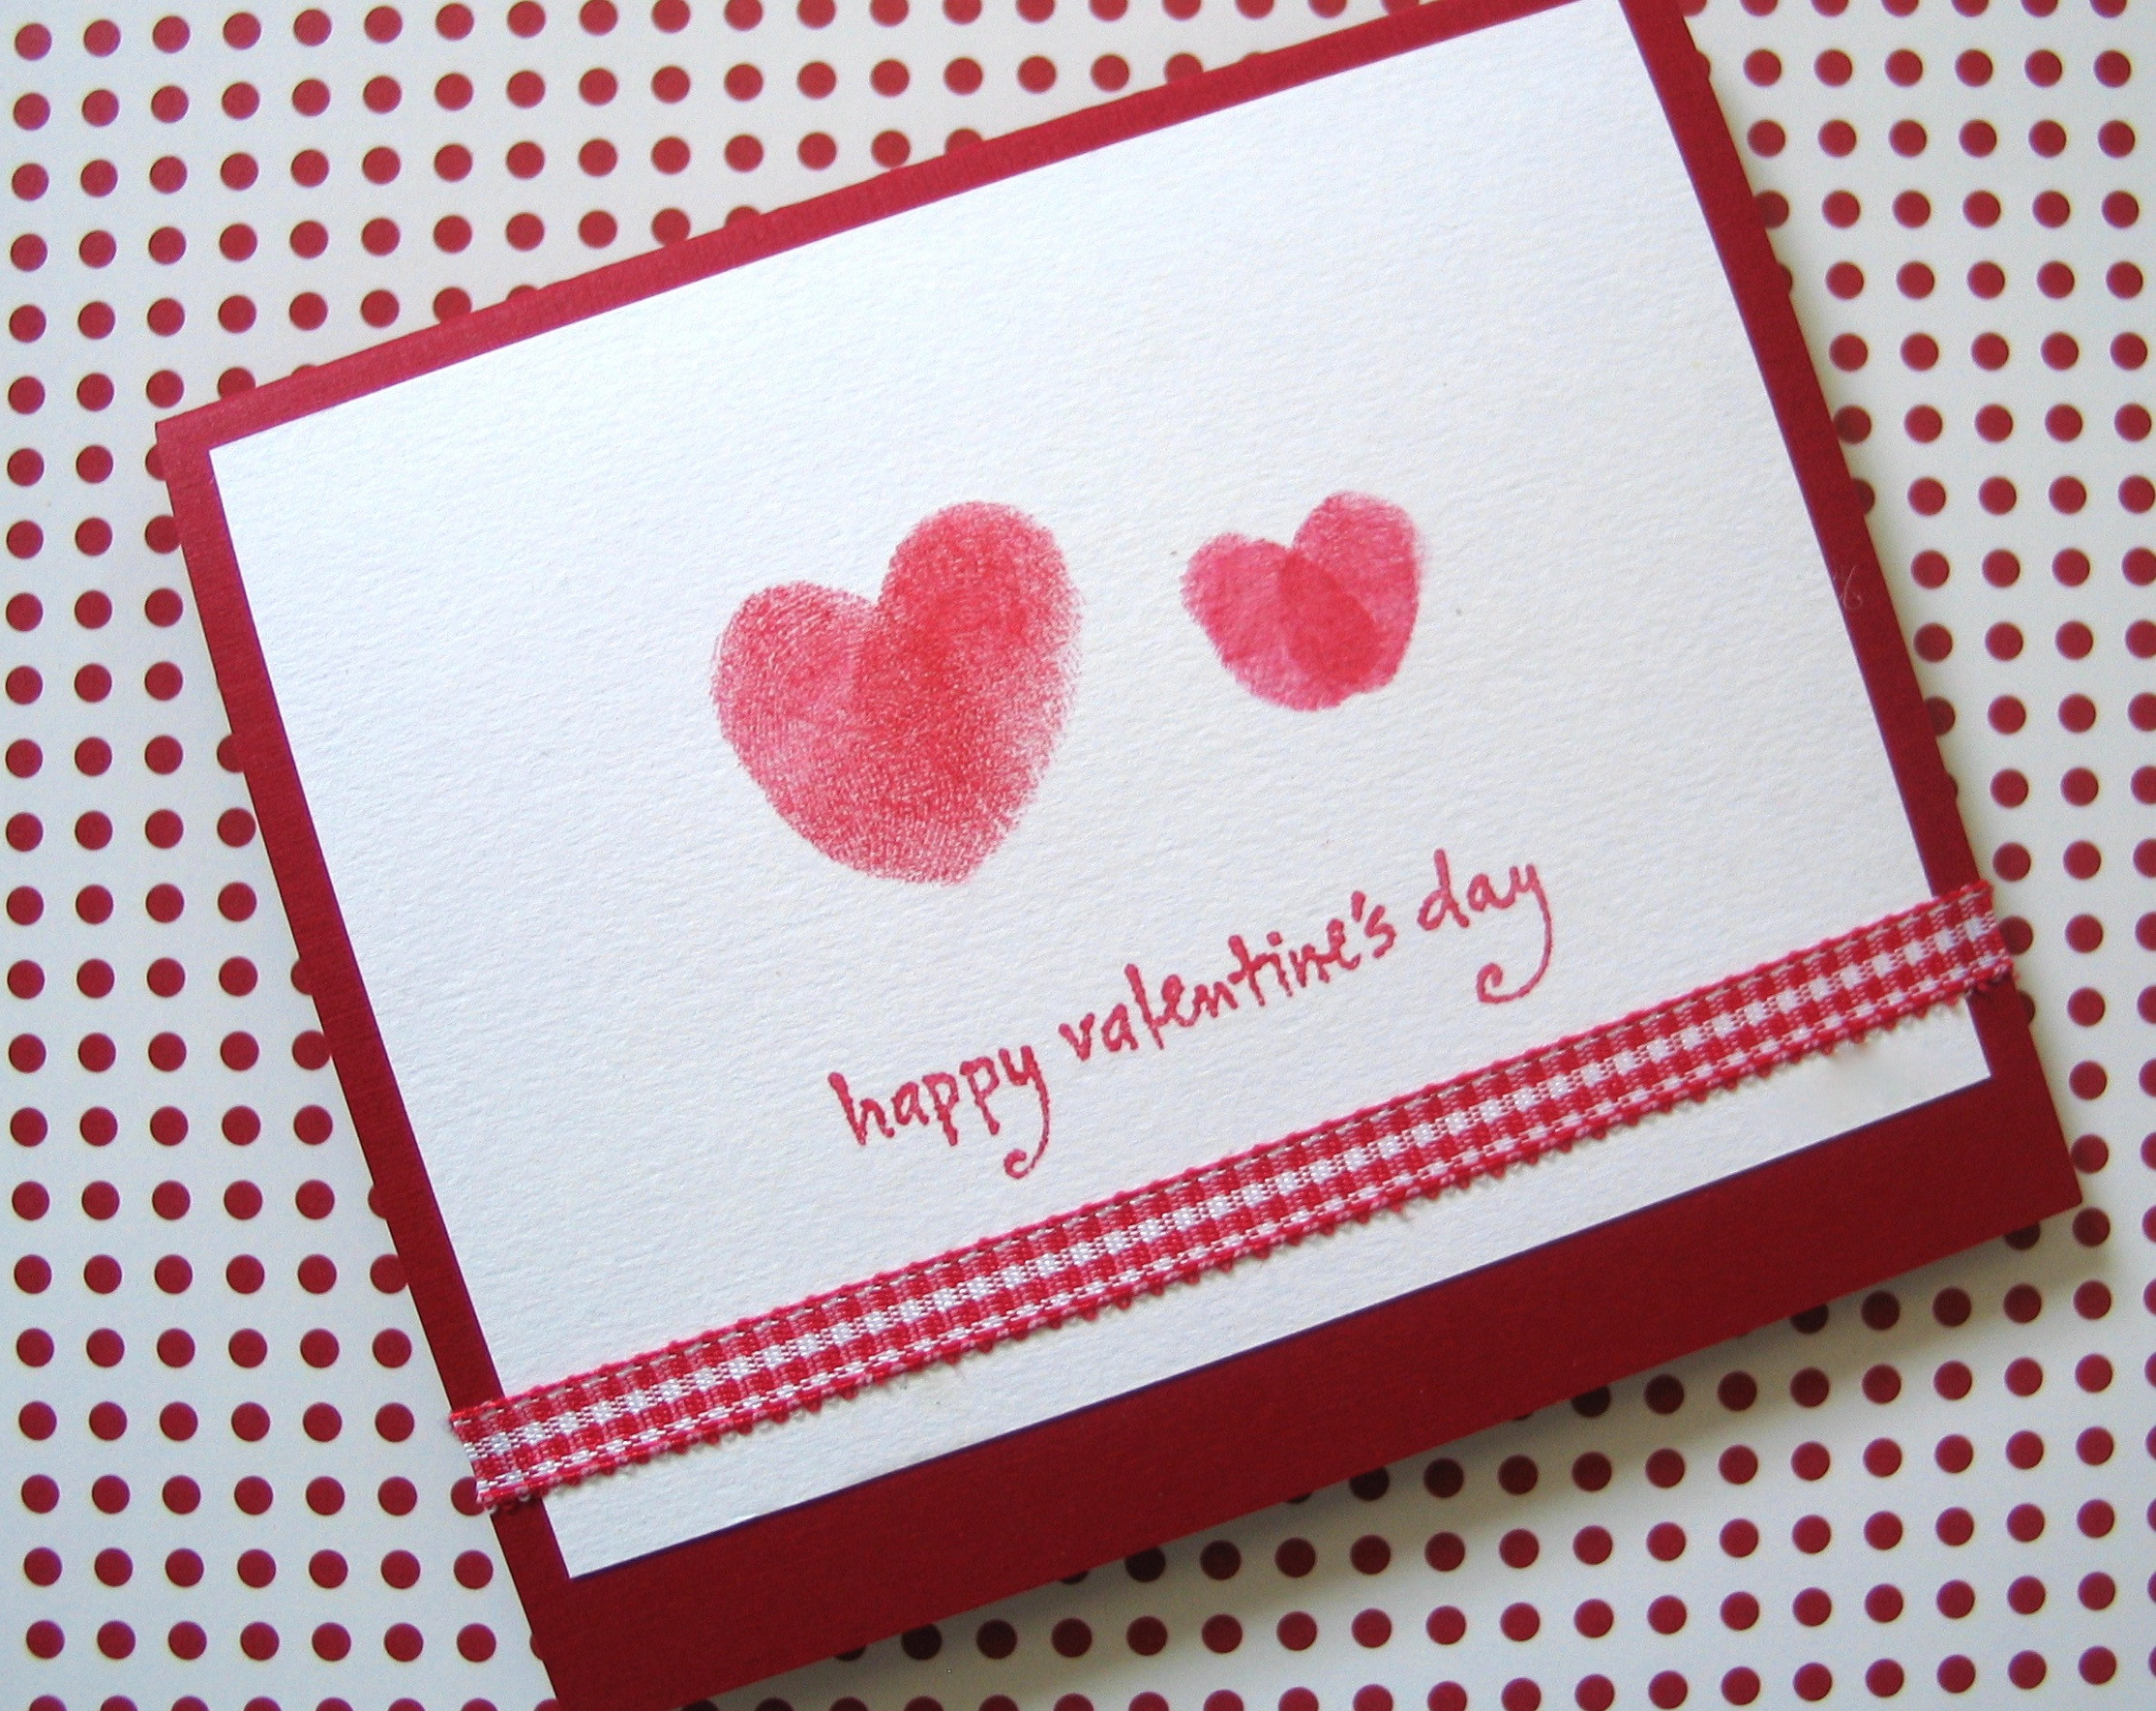 Valentines Day Cards Ideas
 PAS 2 – Valentine’s Day Card